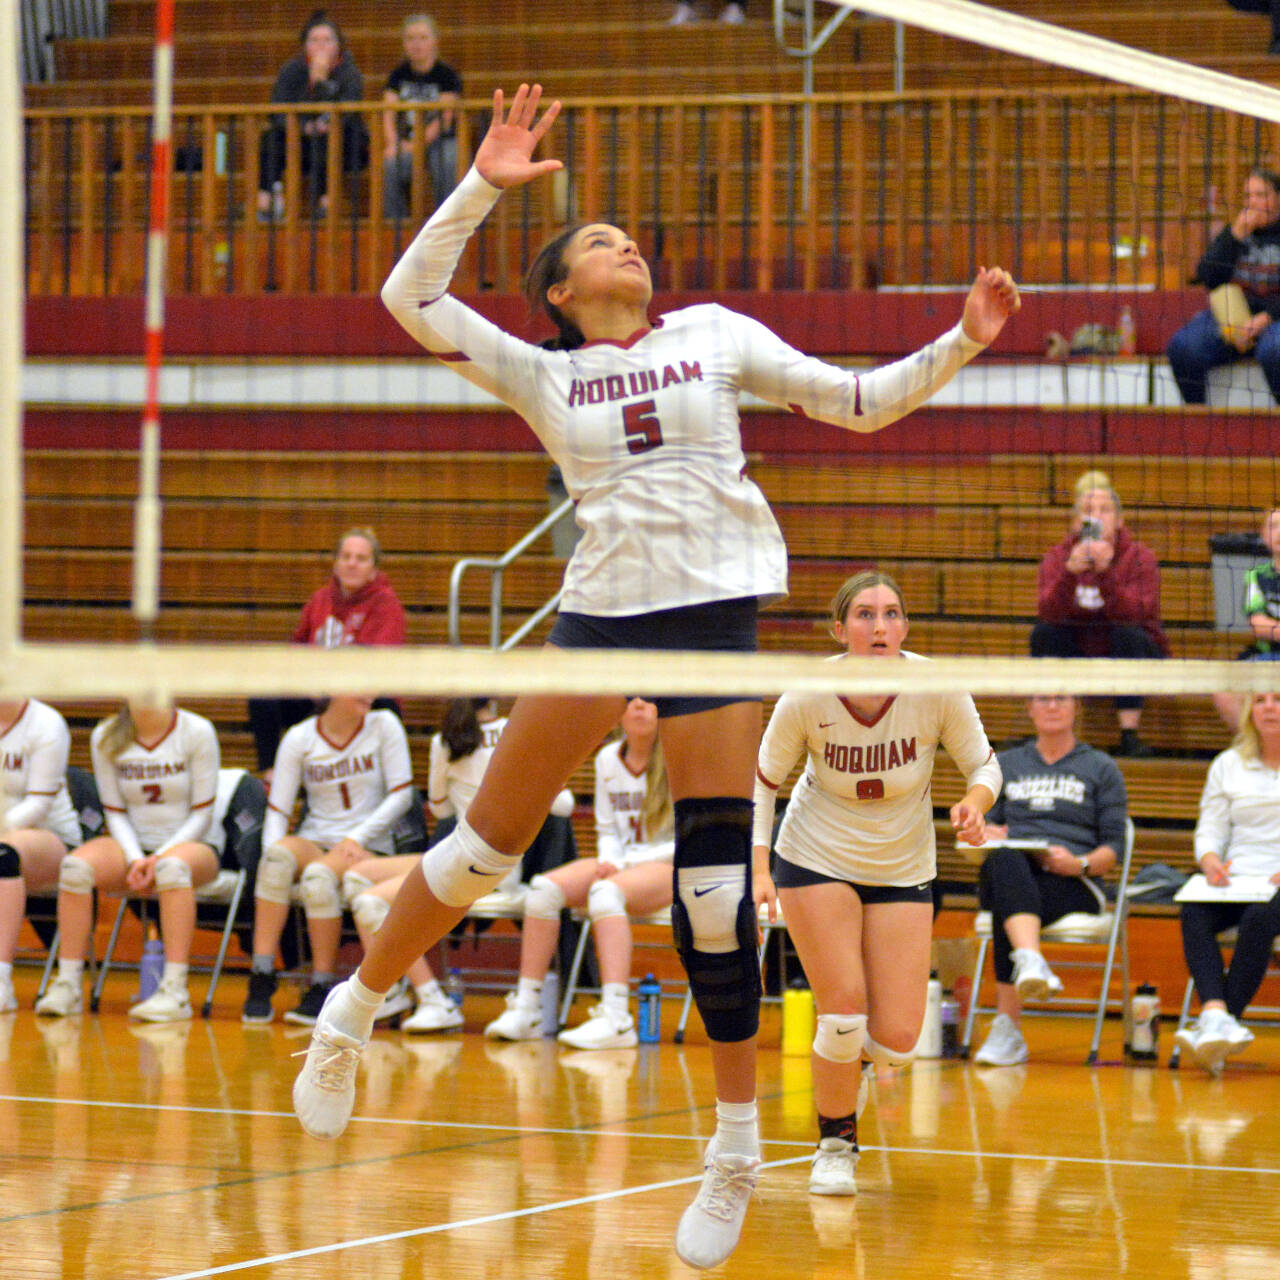 DAILY WORLD FILE PHOTO Hoquiam senior middle blocker Chloe Kennedy won her second-consecutive 1A Evergreen League MVP award after leading the Grizzlies to a league title this season.